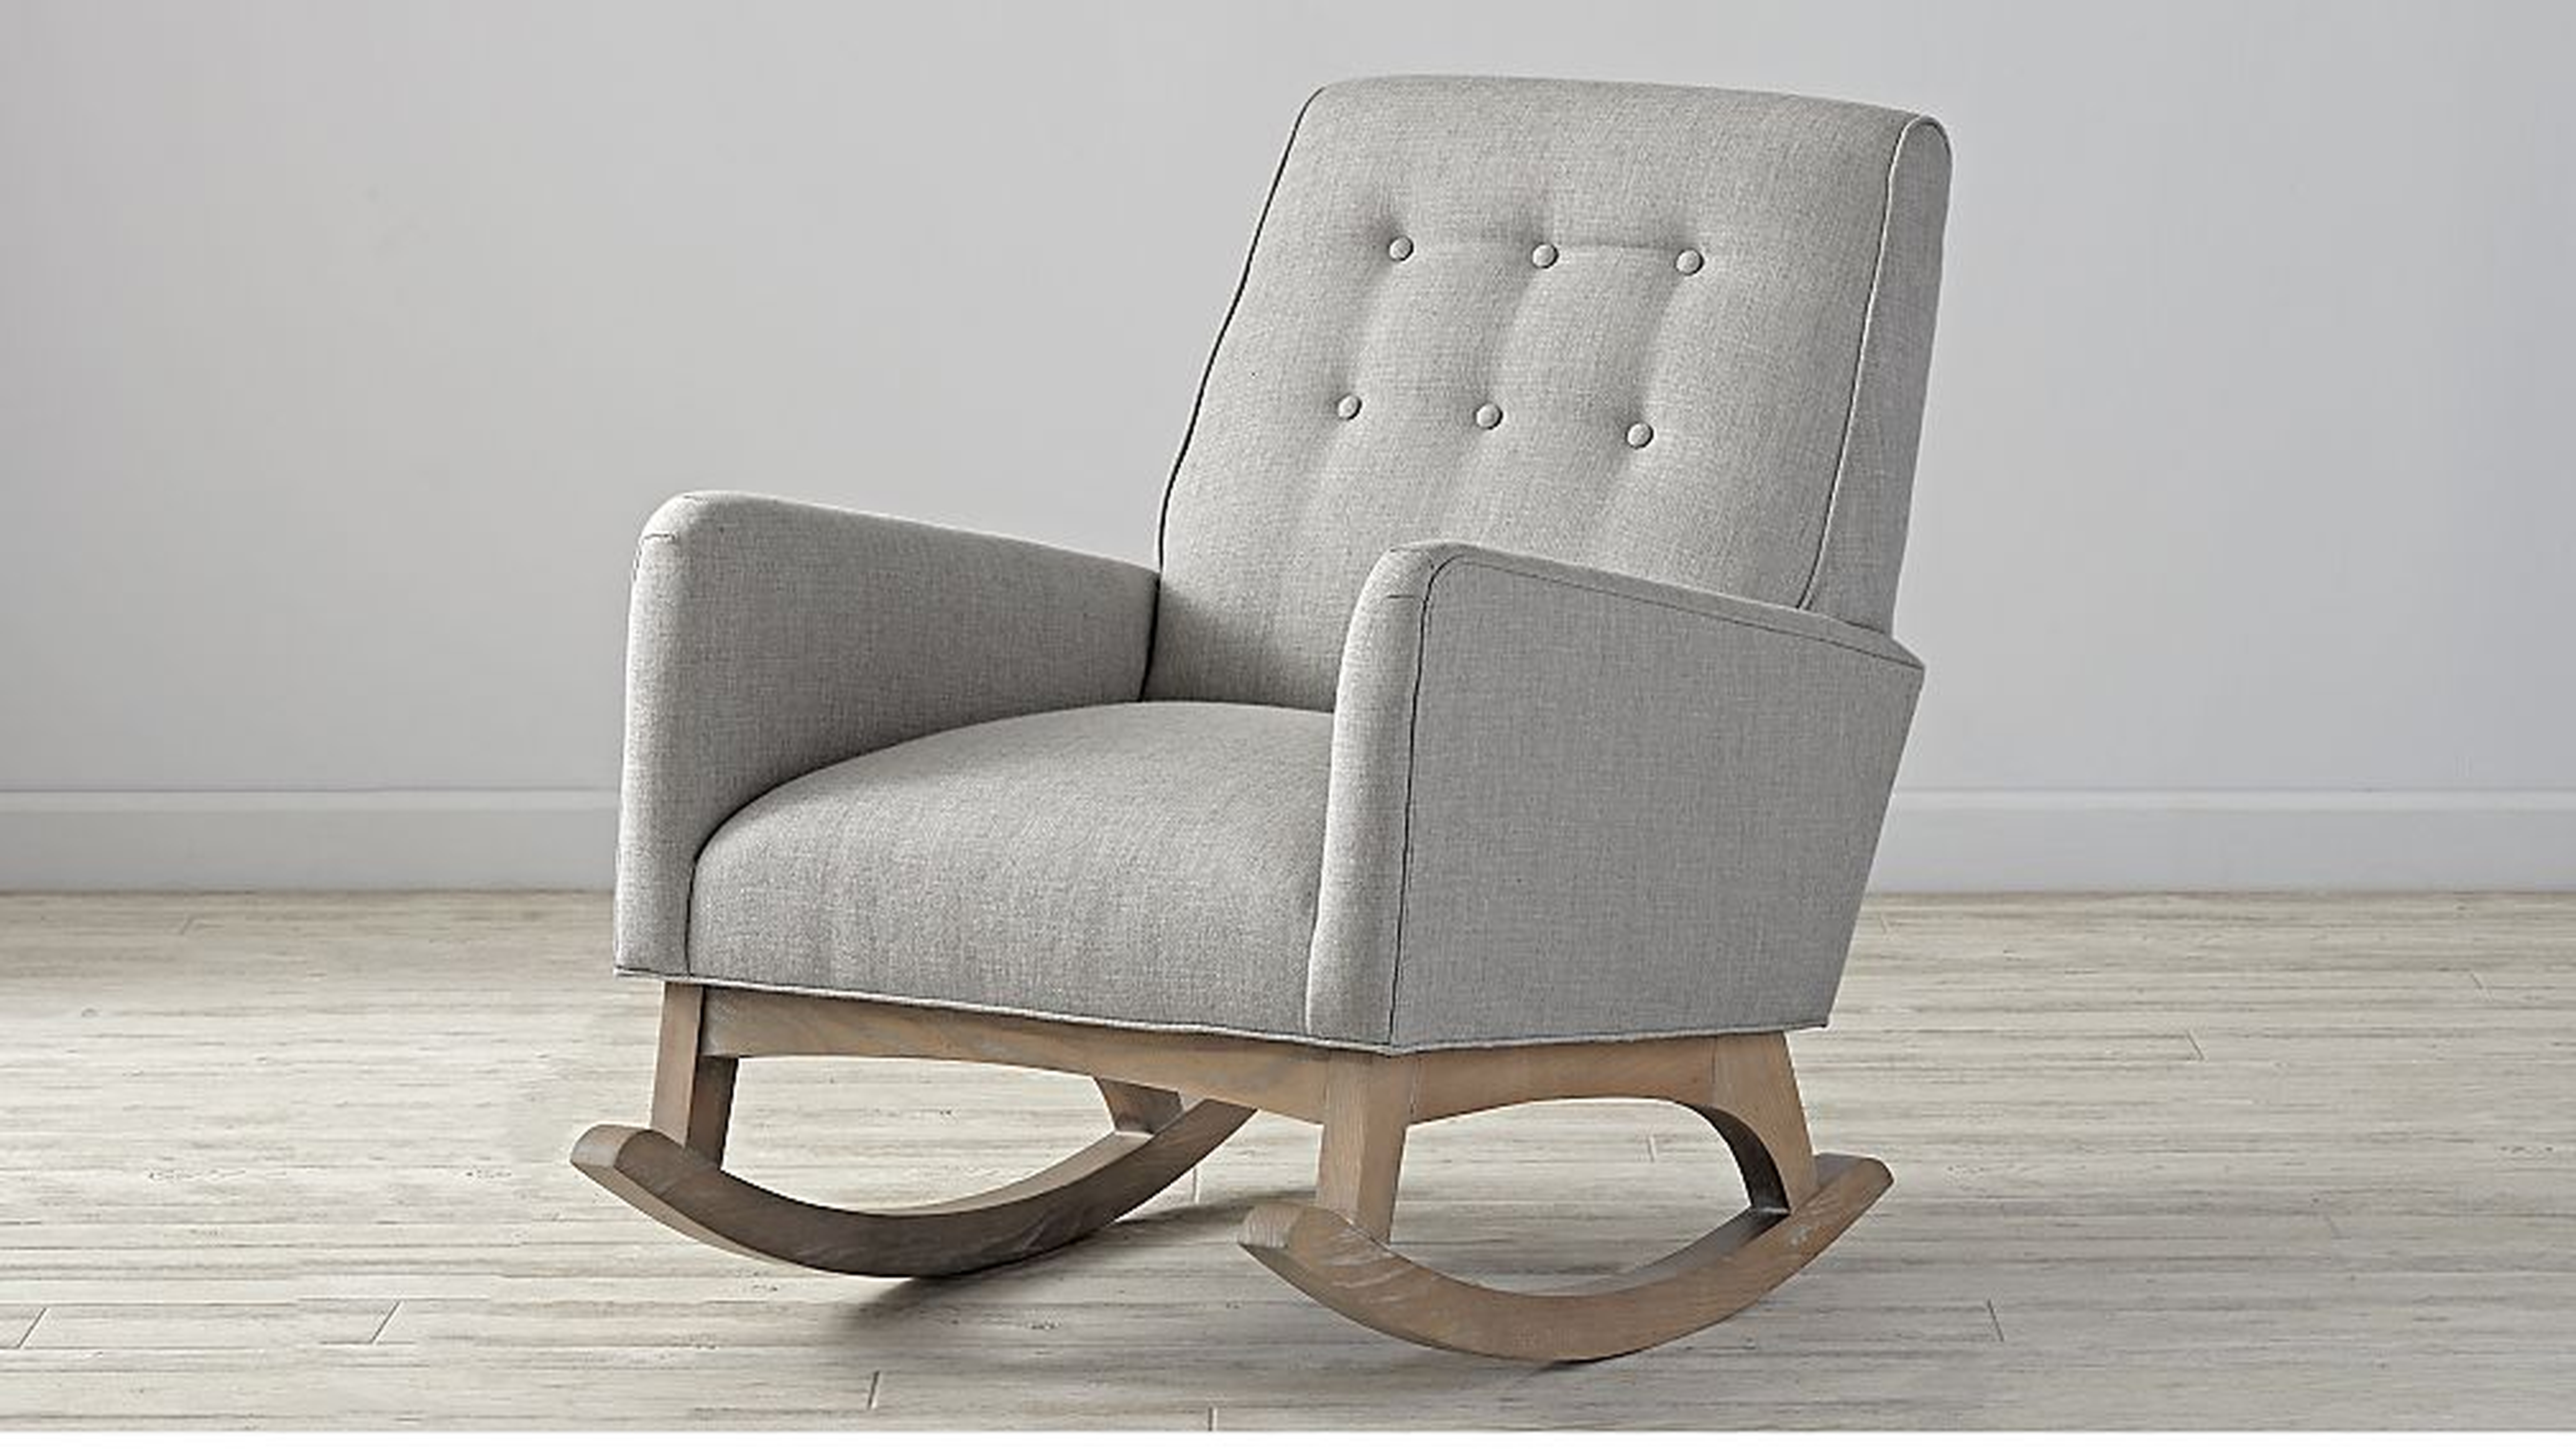 Everly Tufted Rocking Chair - Crate and Barrel